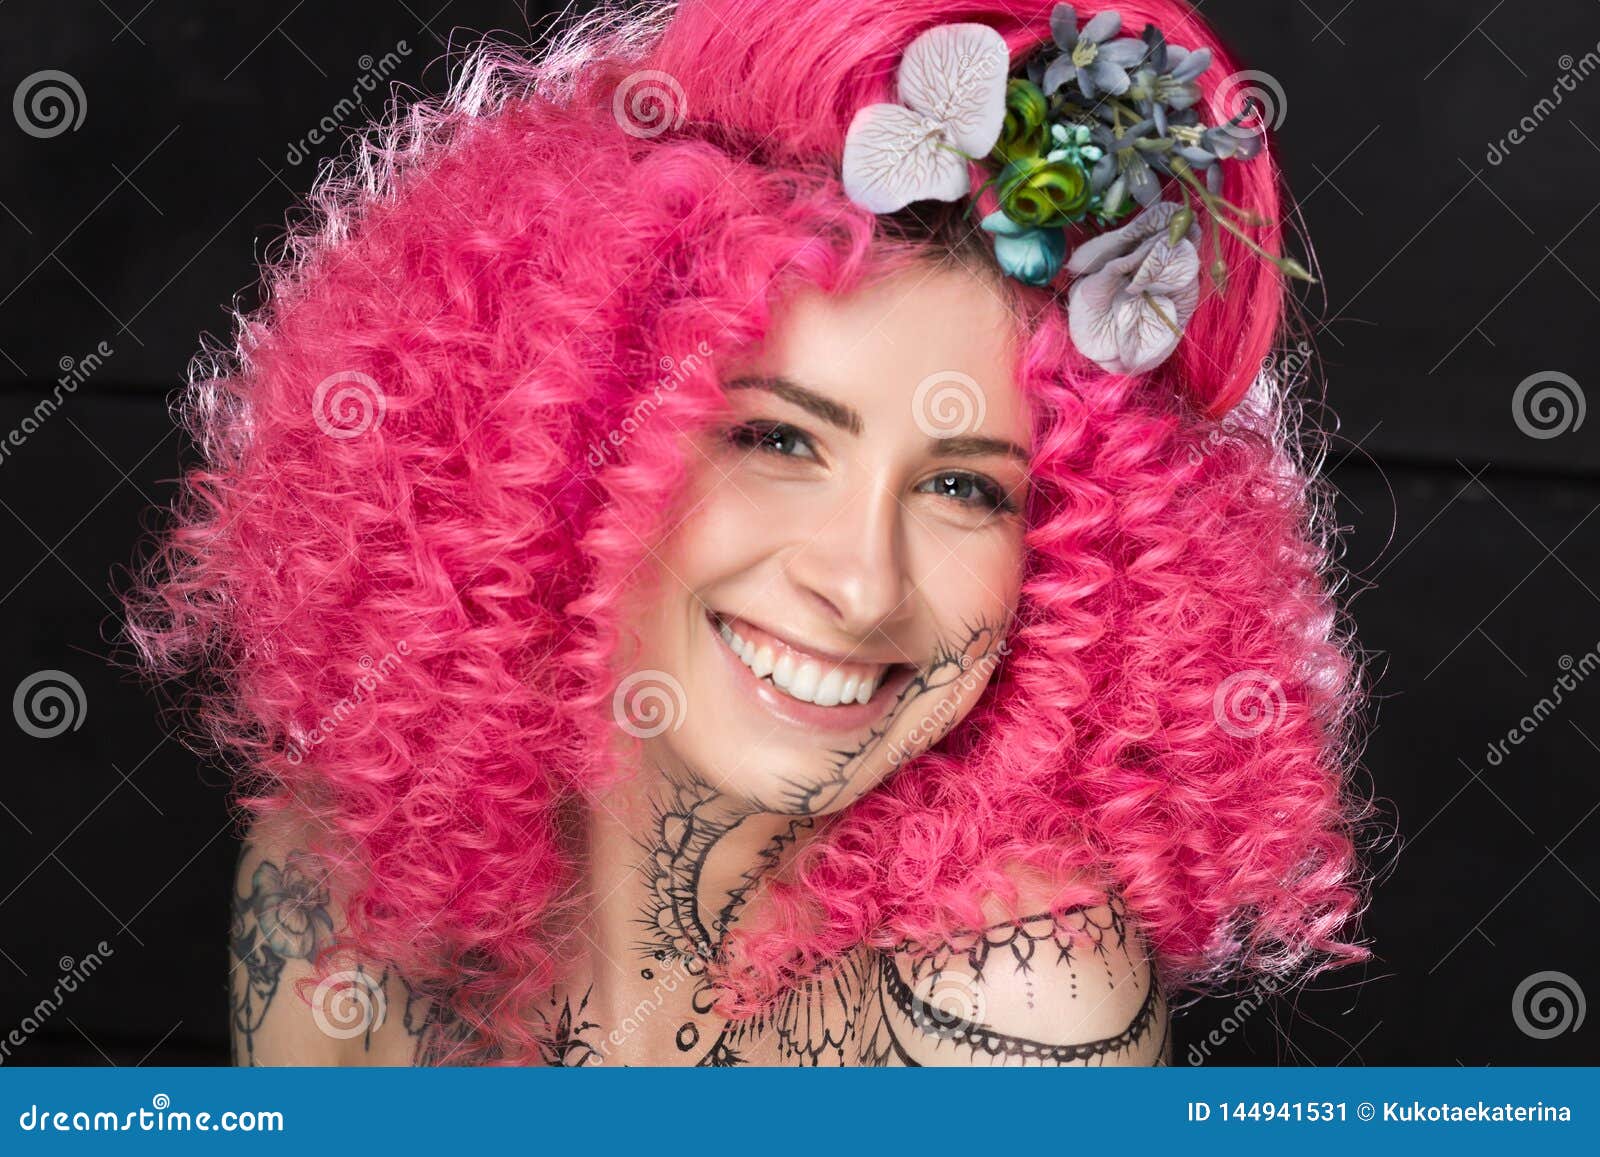 Portrait Of Smiling Young Attractive Caucasian Girl Model With Afro Style Curly Bright Pink Hair Tattooed Face And Flowers Woven Stock Image Image Of Caucasian Beauty 144941531